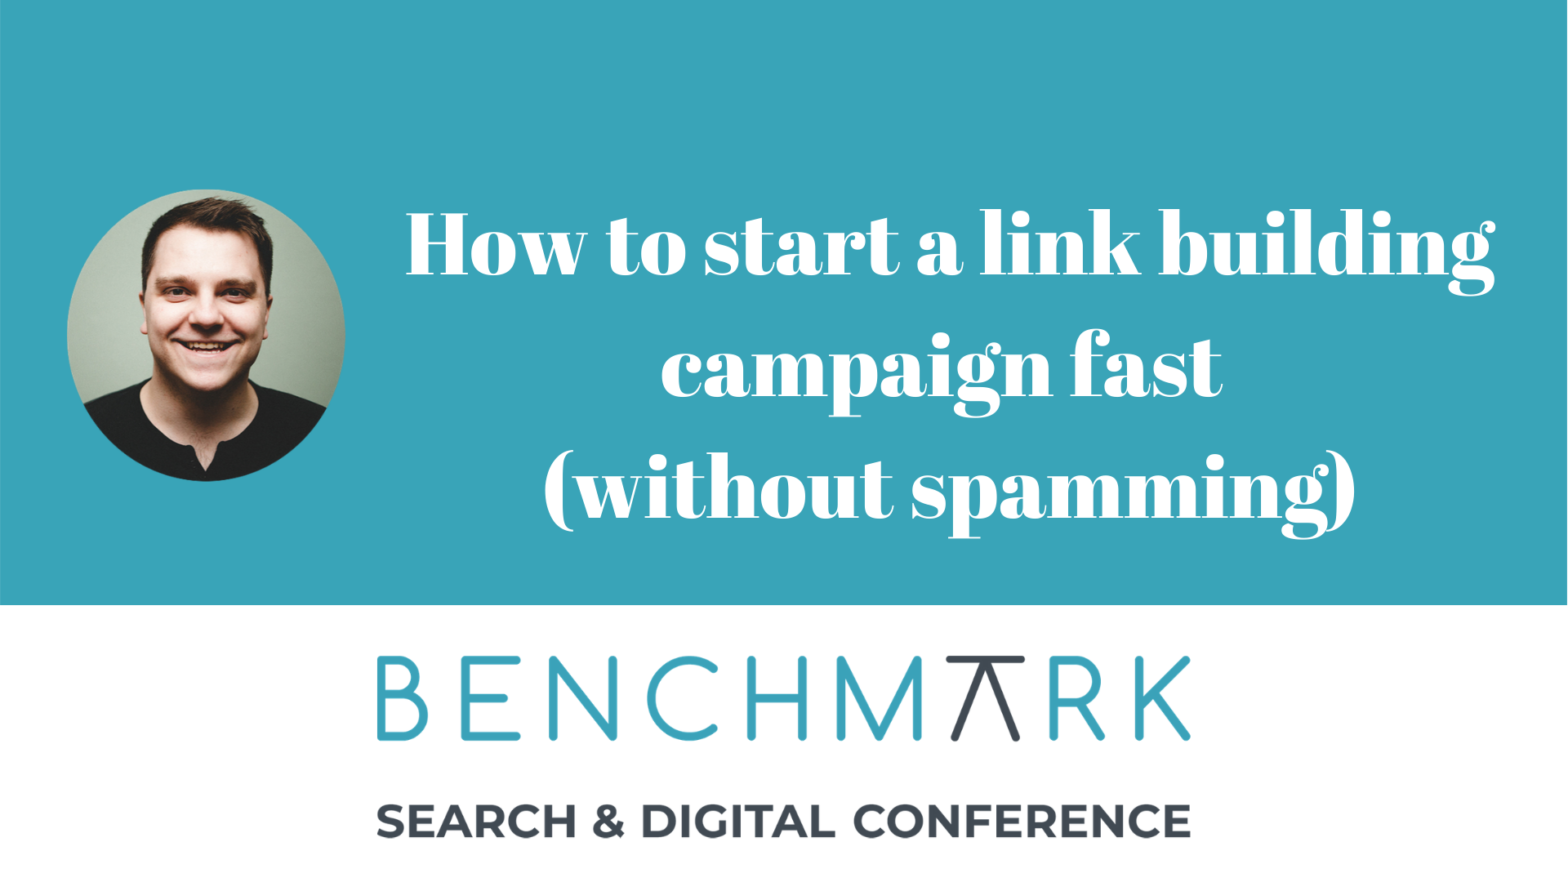 How to start a link building campaign fast (without spamming)